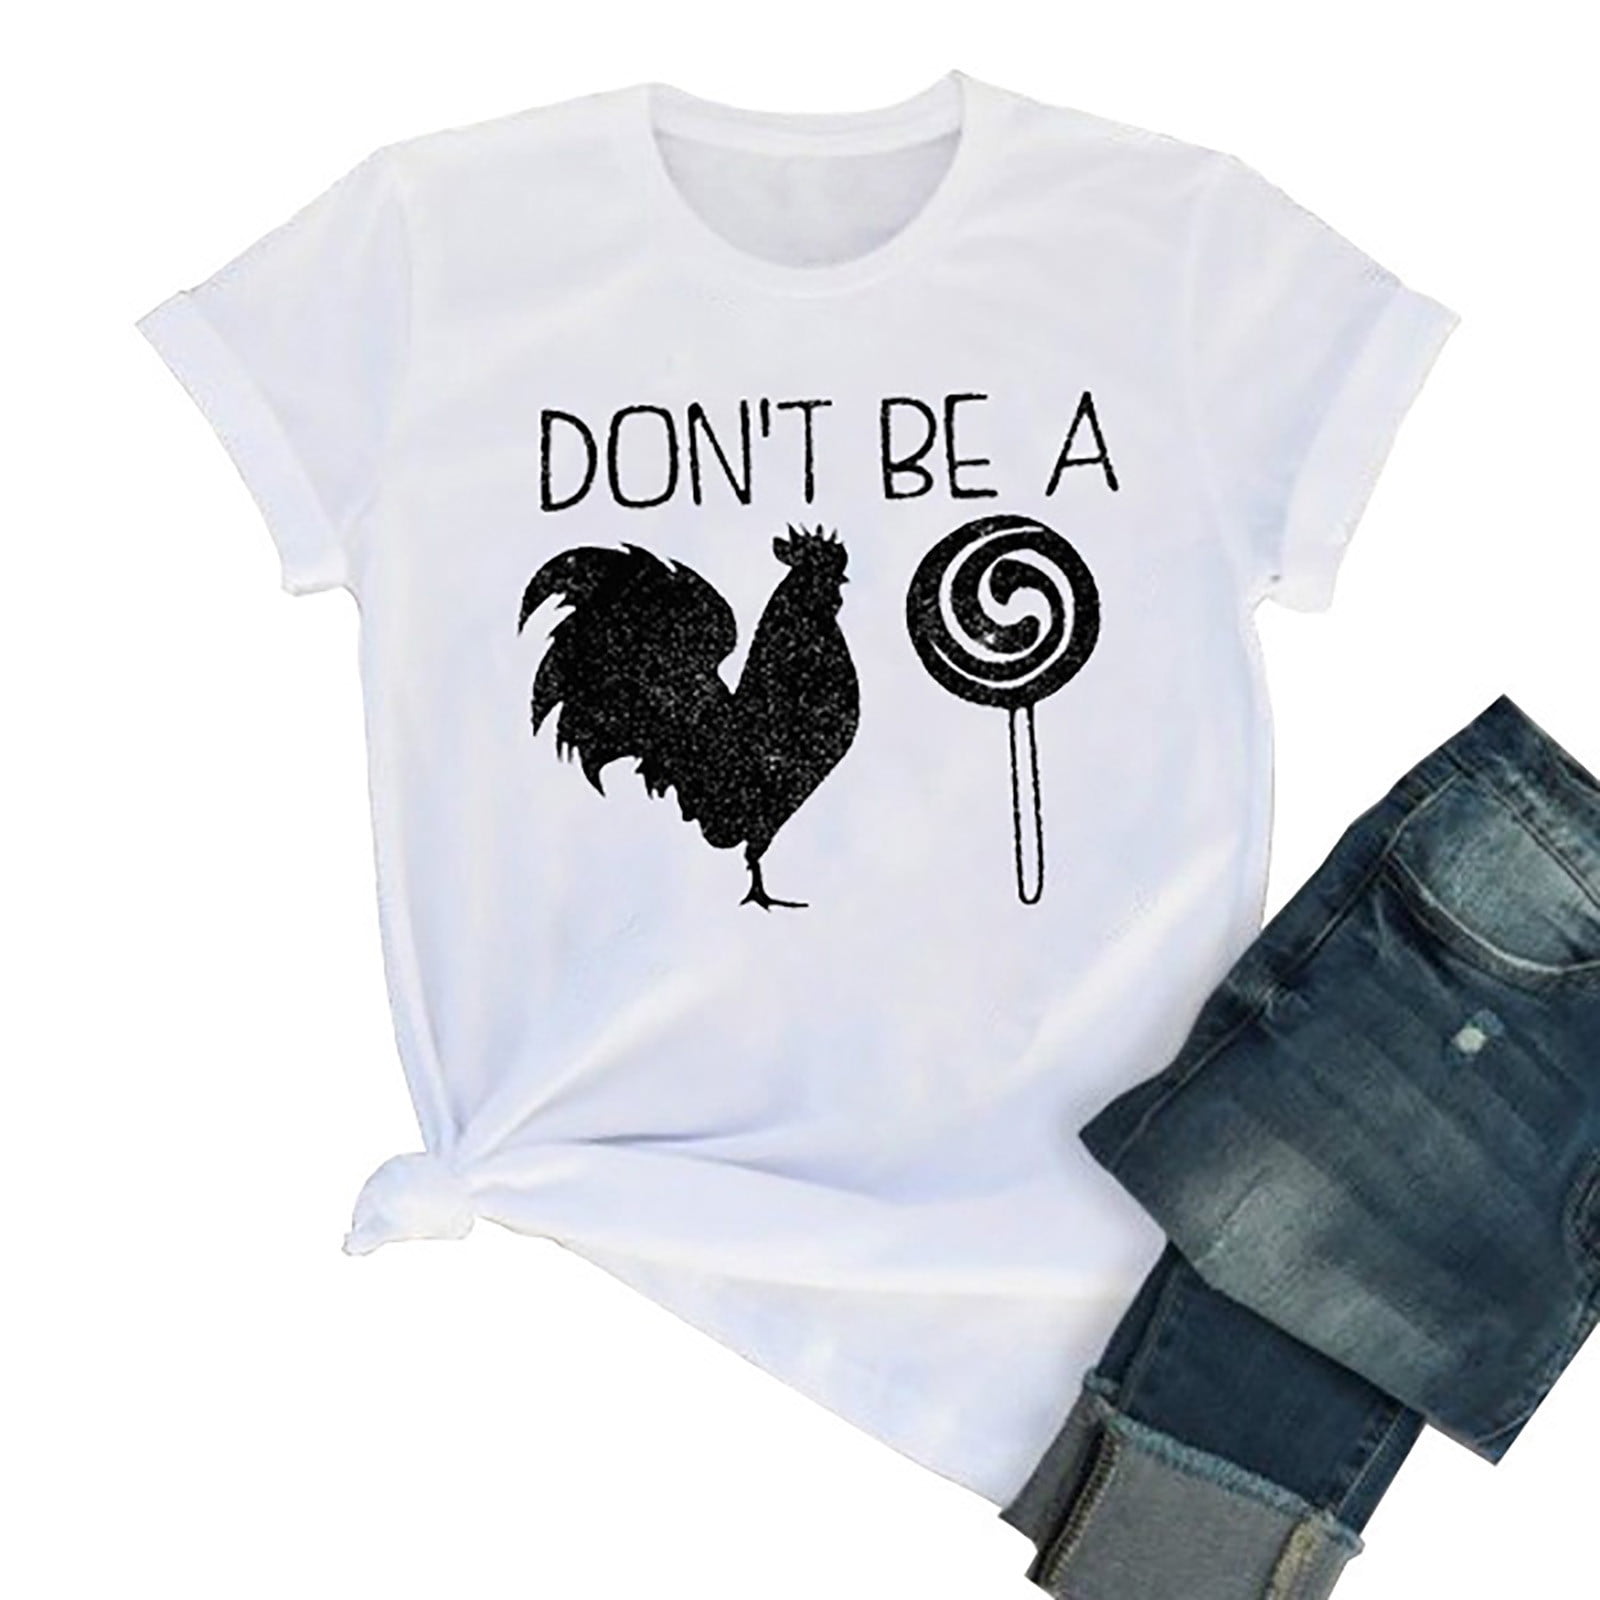 Hotkey Womens Short Sleeve Tops Crewneck T Shirts Peace Love Letter Chicken Print Graphic Tees Summer Top Blouses for Women 